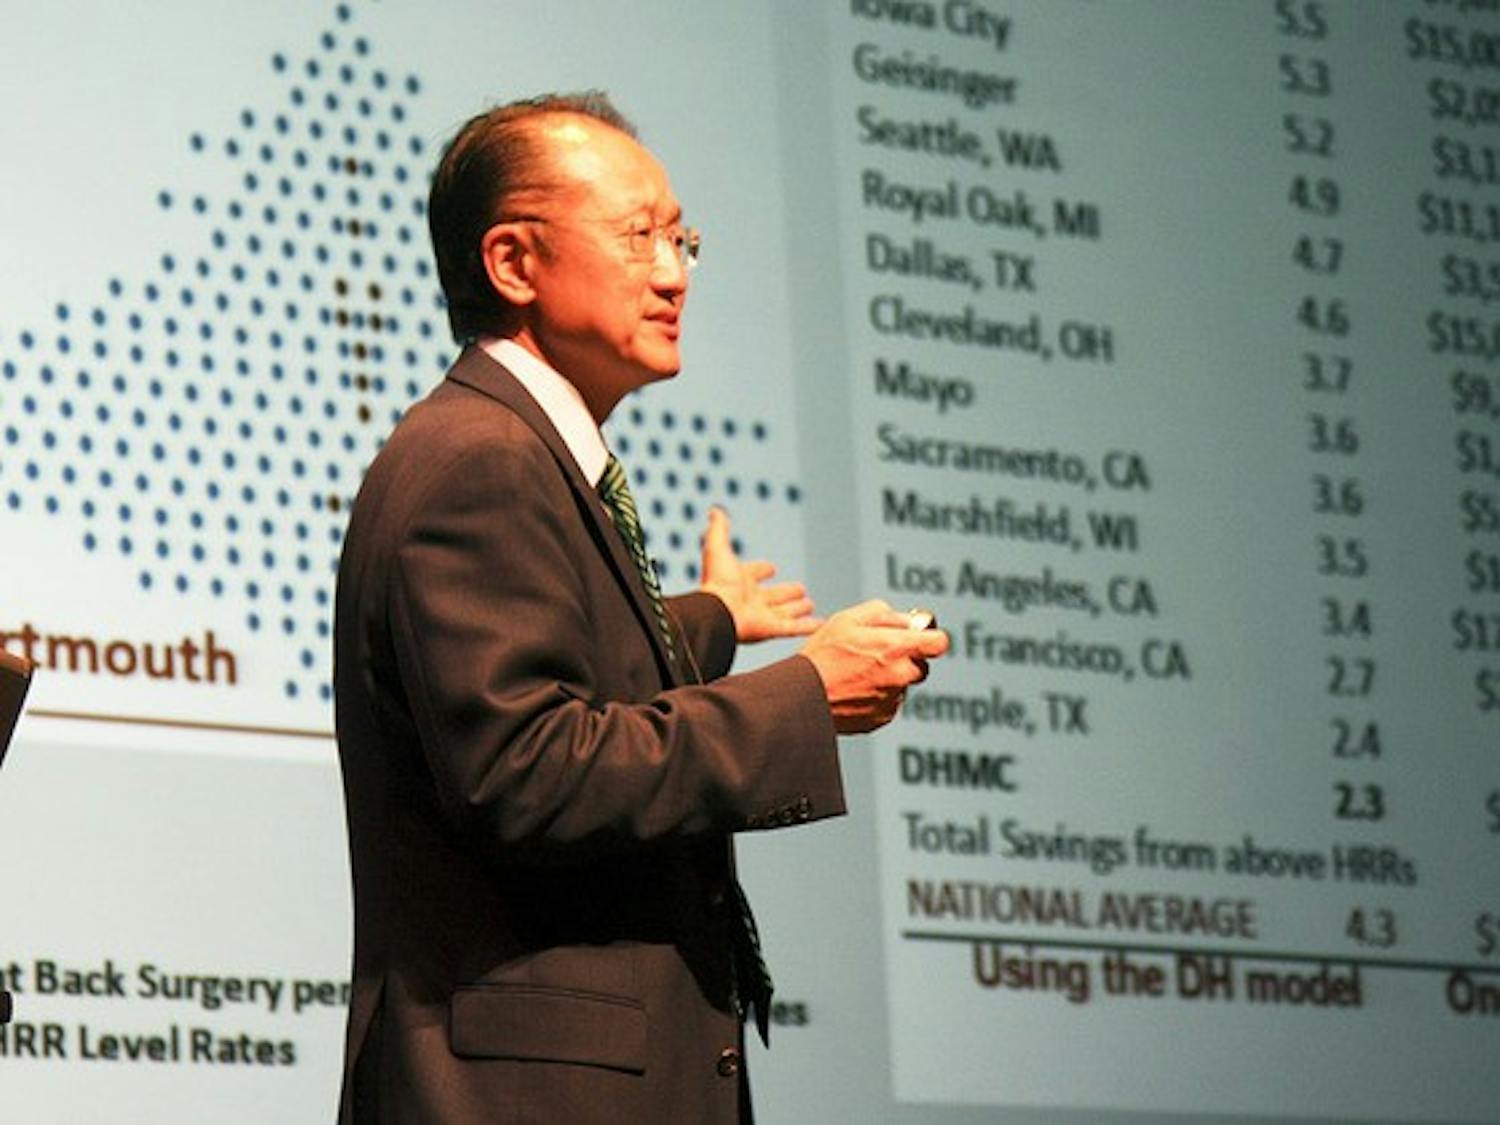 College President Jim Yong Kim discussed ways to cut health care costs.